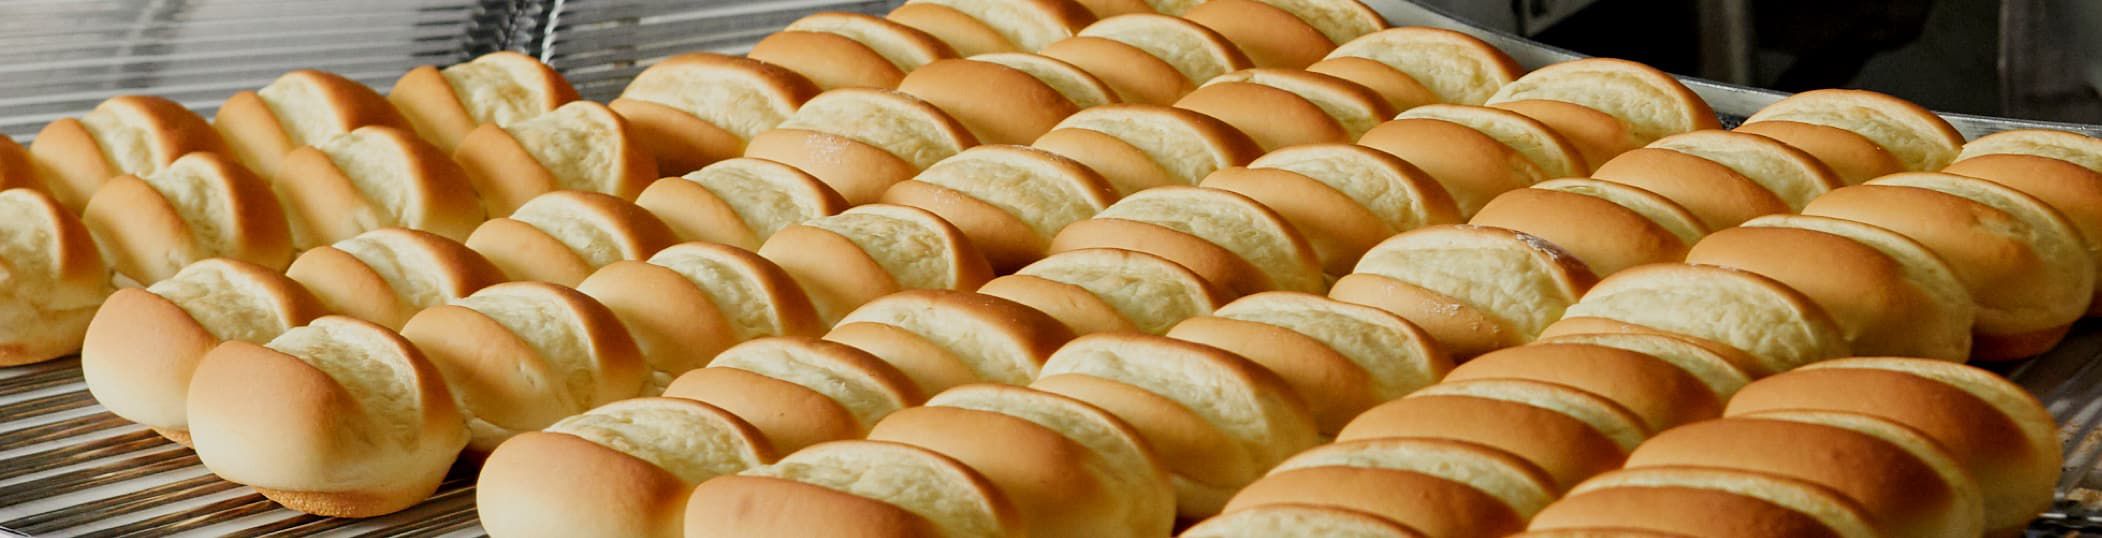 H&S Bakery bread rolls being made